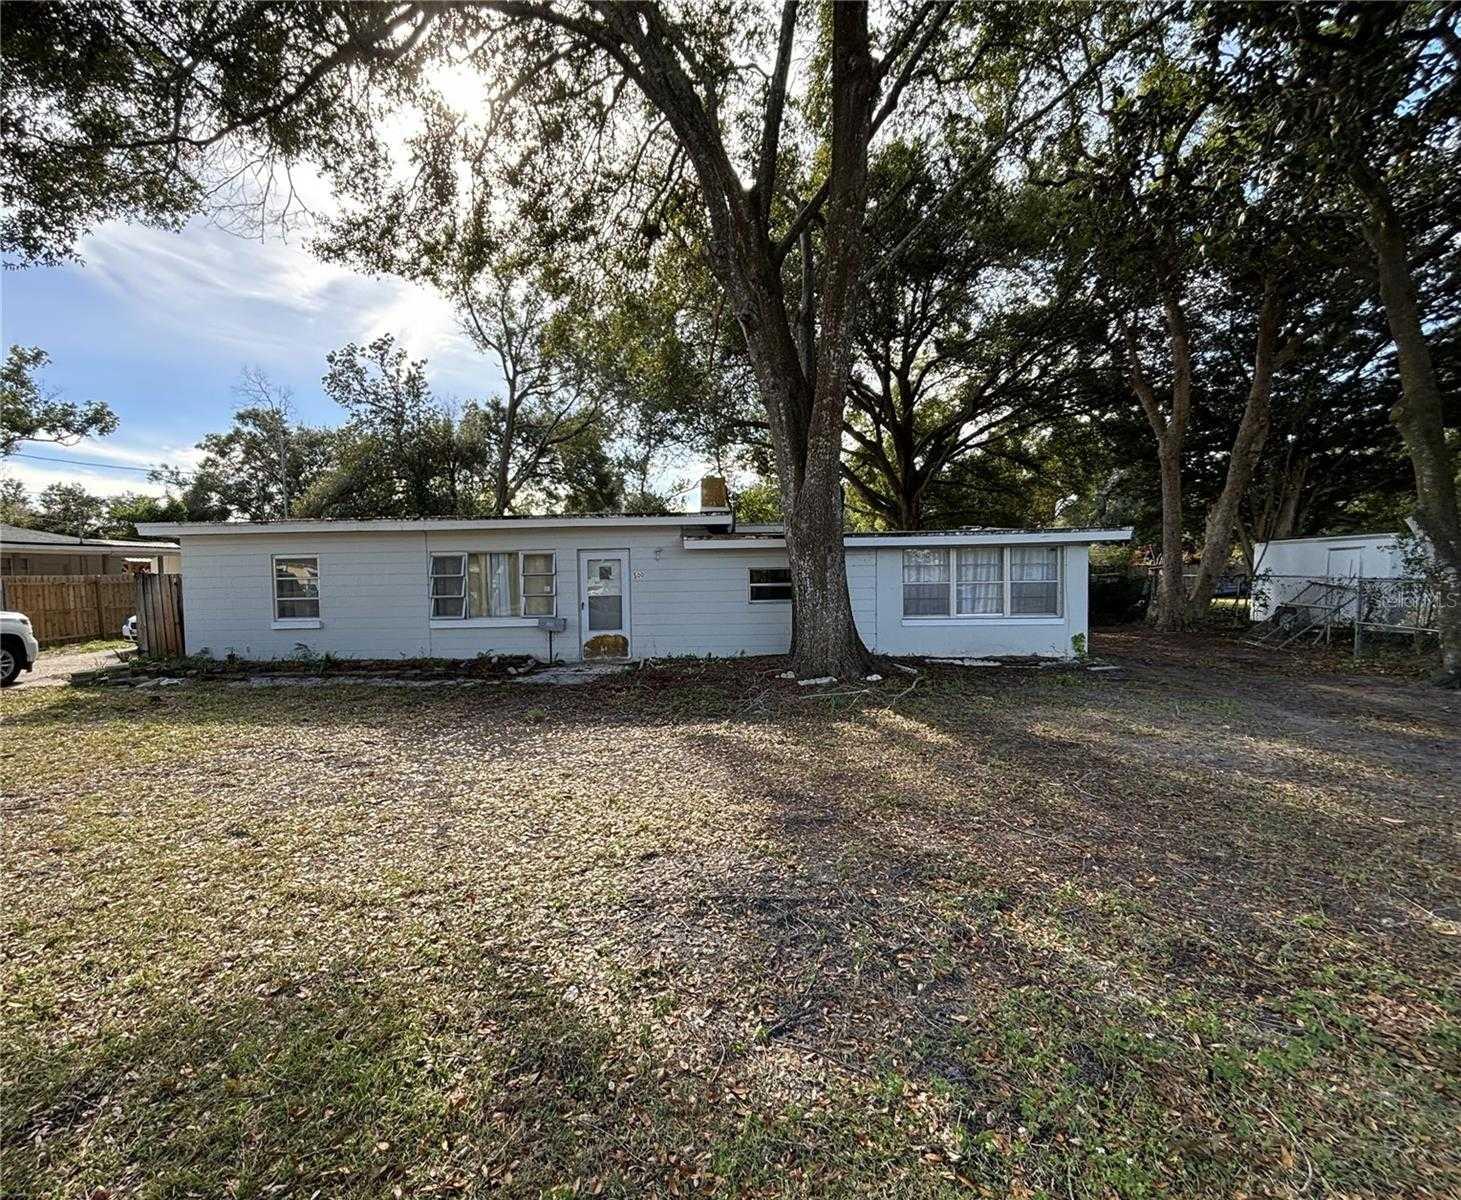 500 PRAIRIE LAKE, FERN PARK, Single Family Residence,  for sale, Natalie Amento, PA, Florida Realty Investments